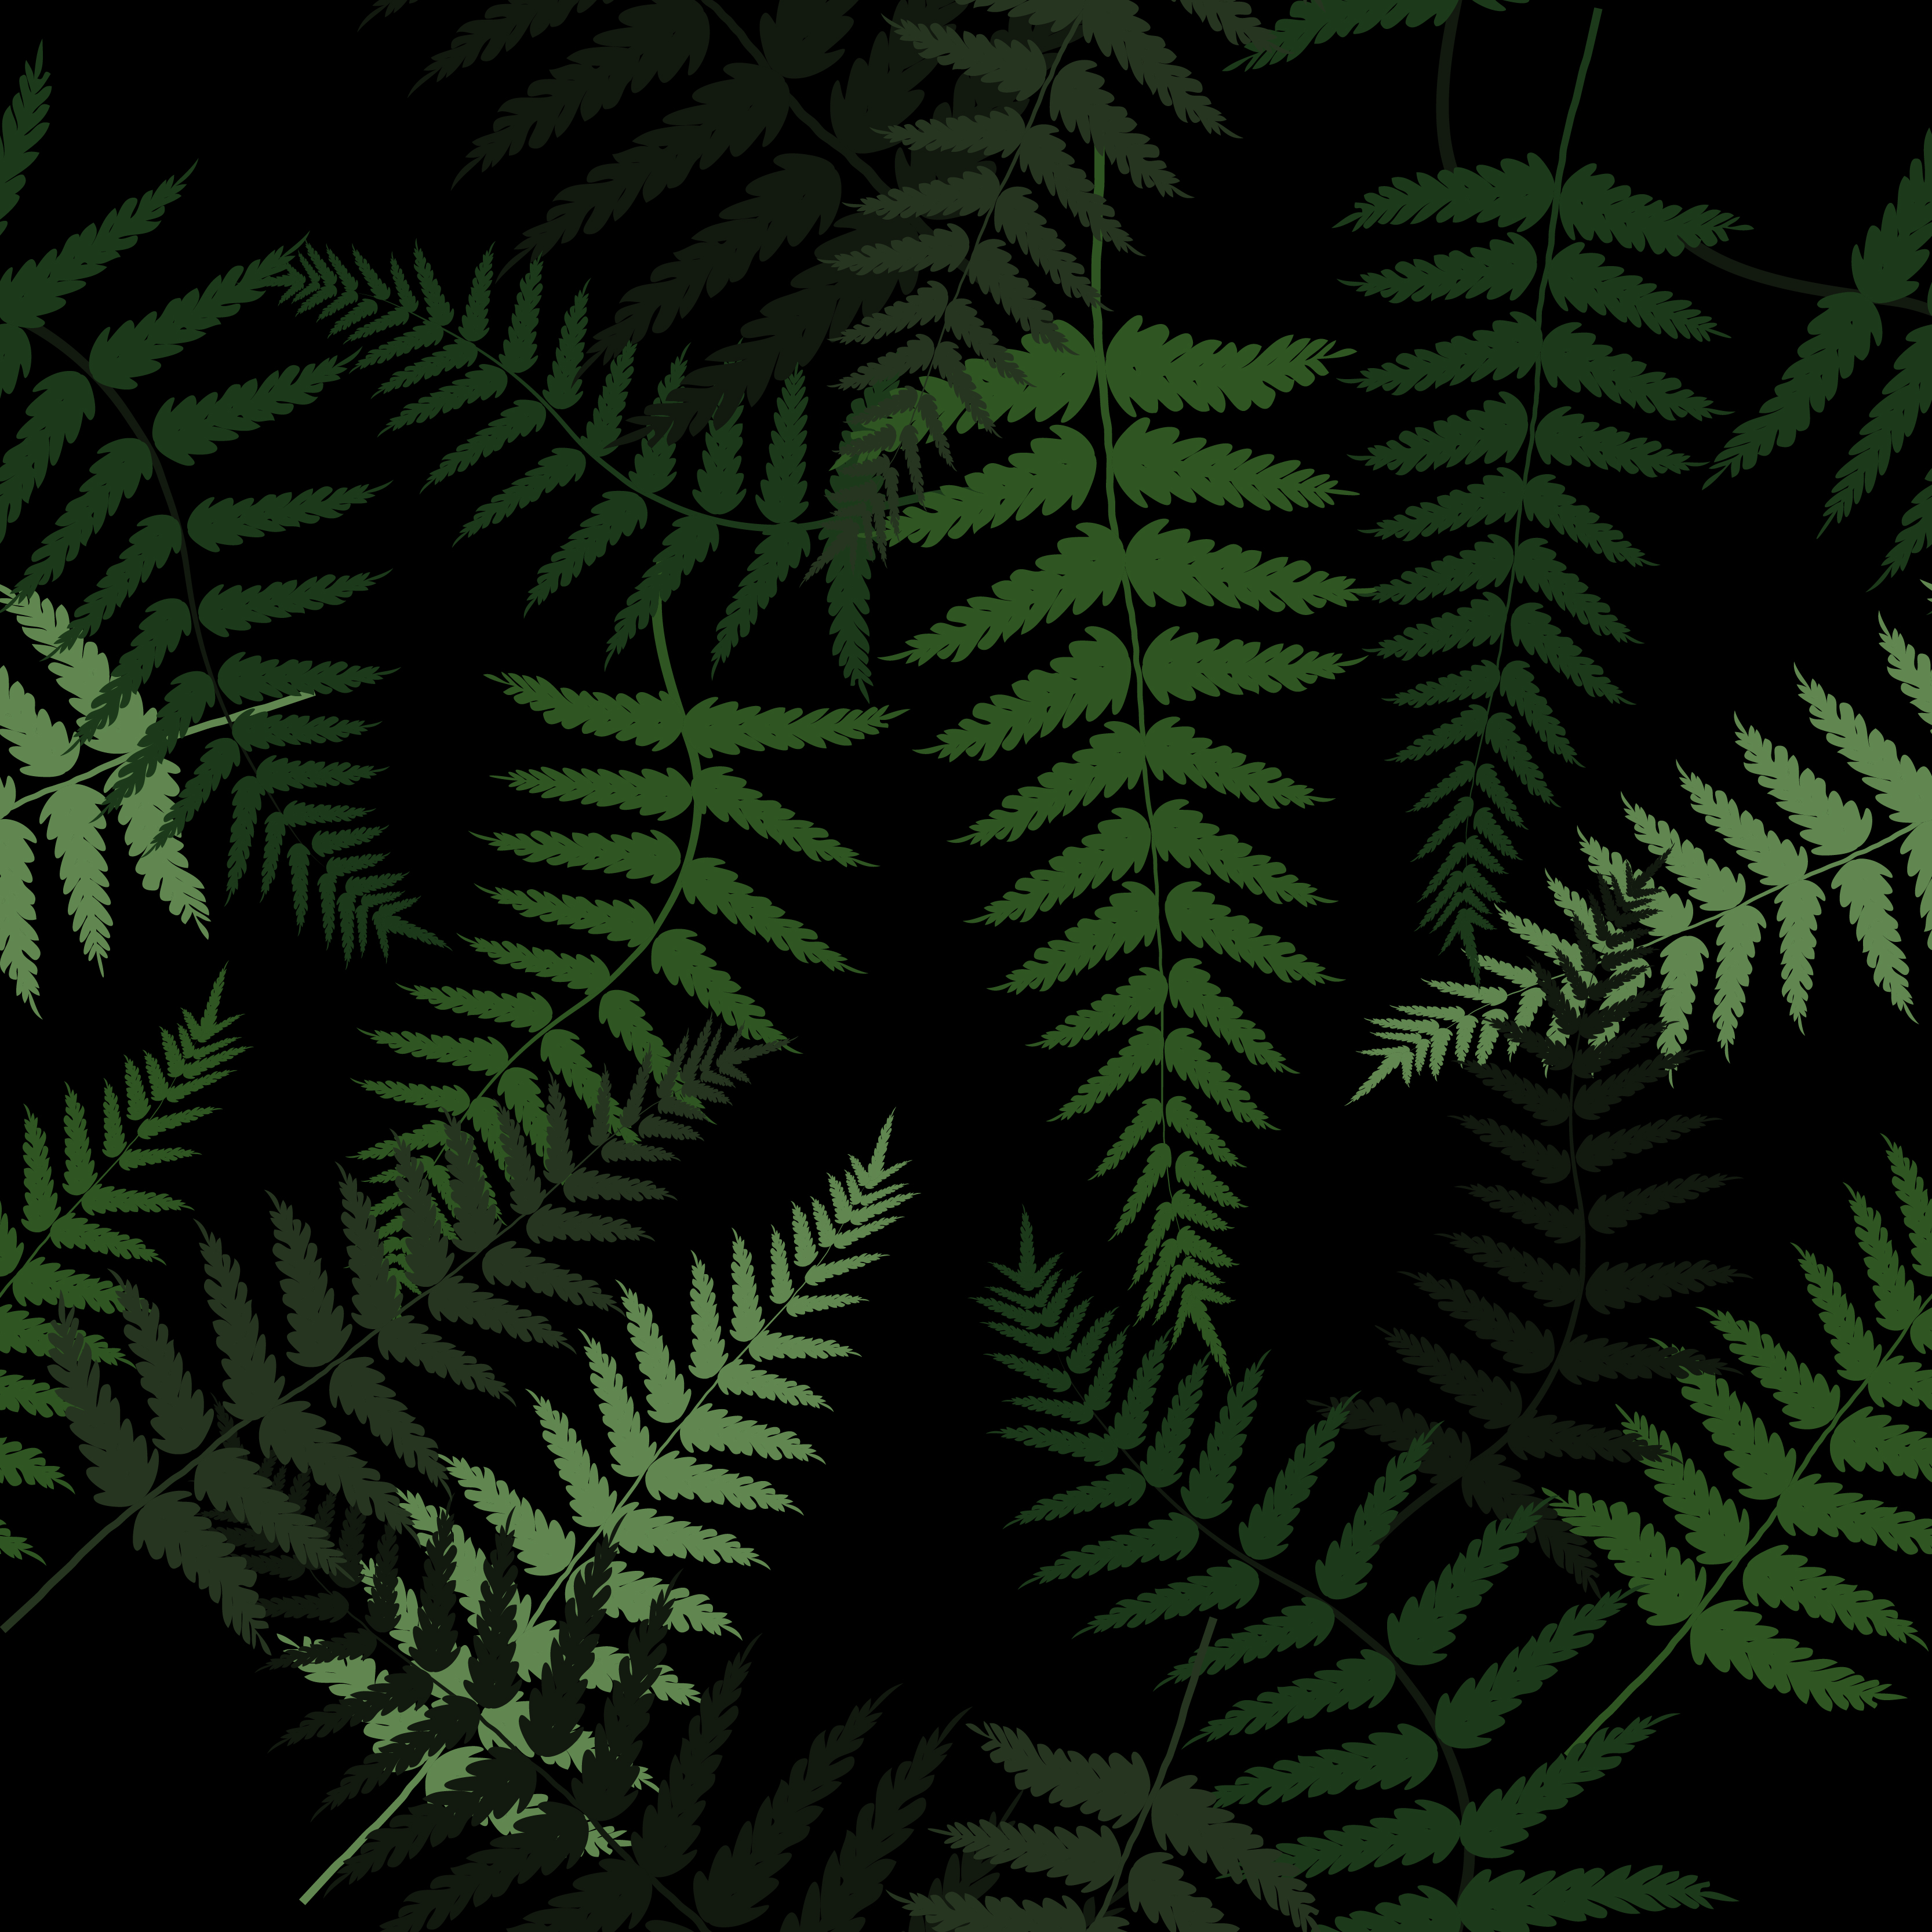 Green fern leaves pattern 1310945 - Download Free Vectors, Clipart